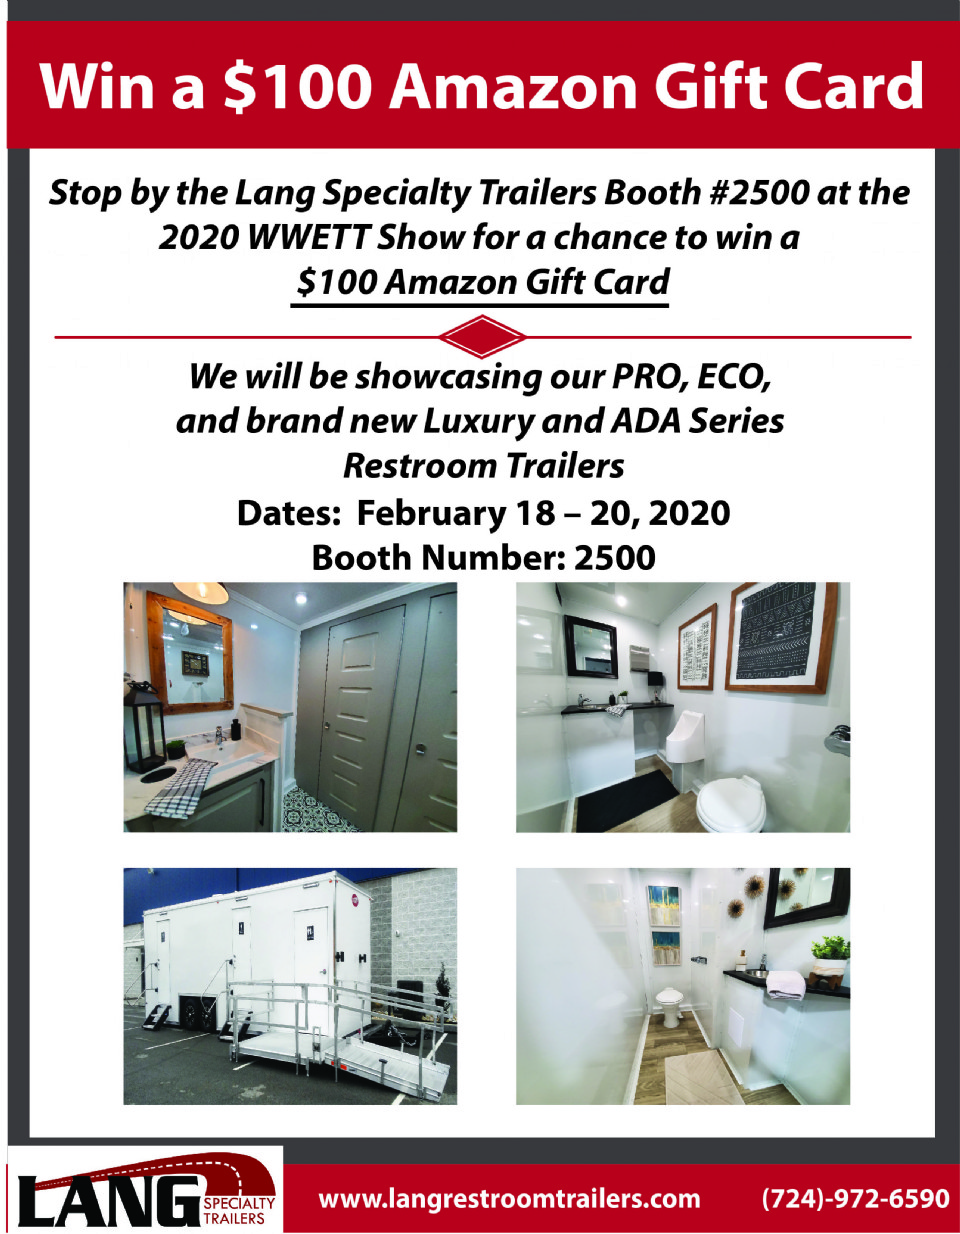 Restroom Trailer Exhibits, Happy Hour, and a Chance to Win a $100 Amazon Gift Card!